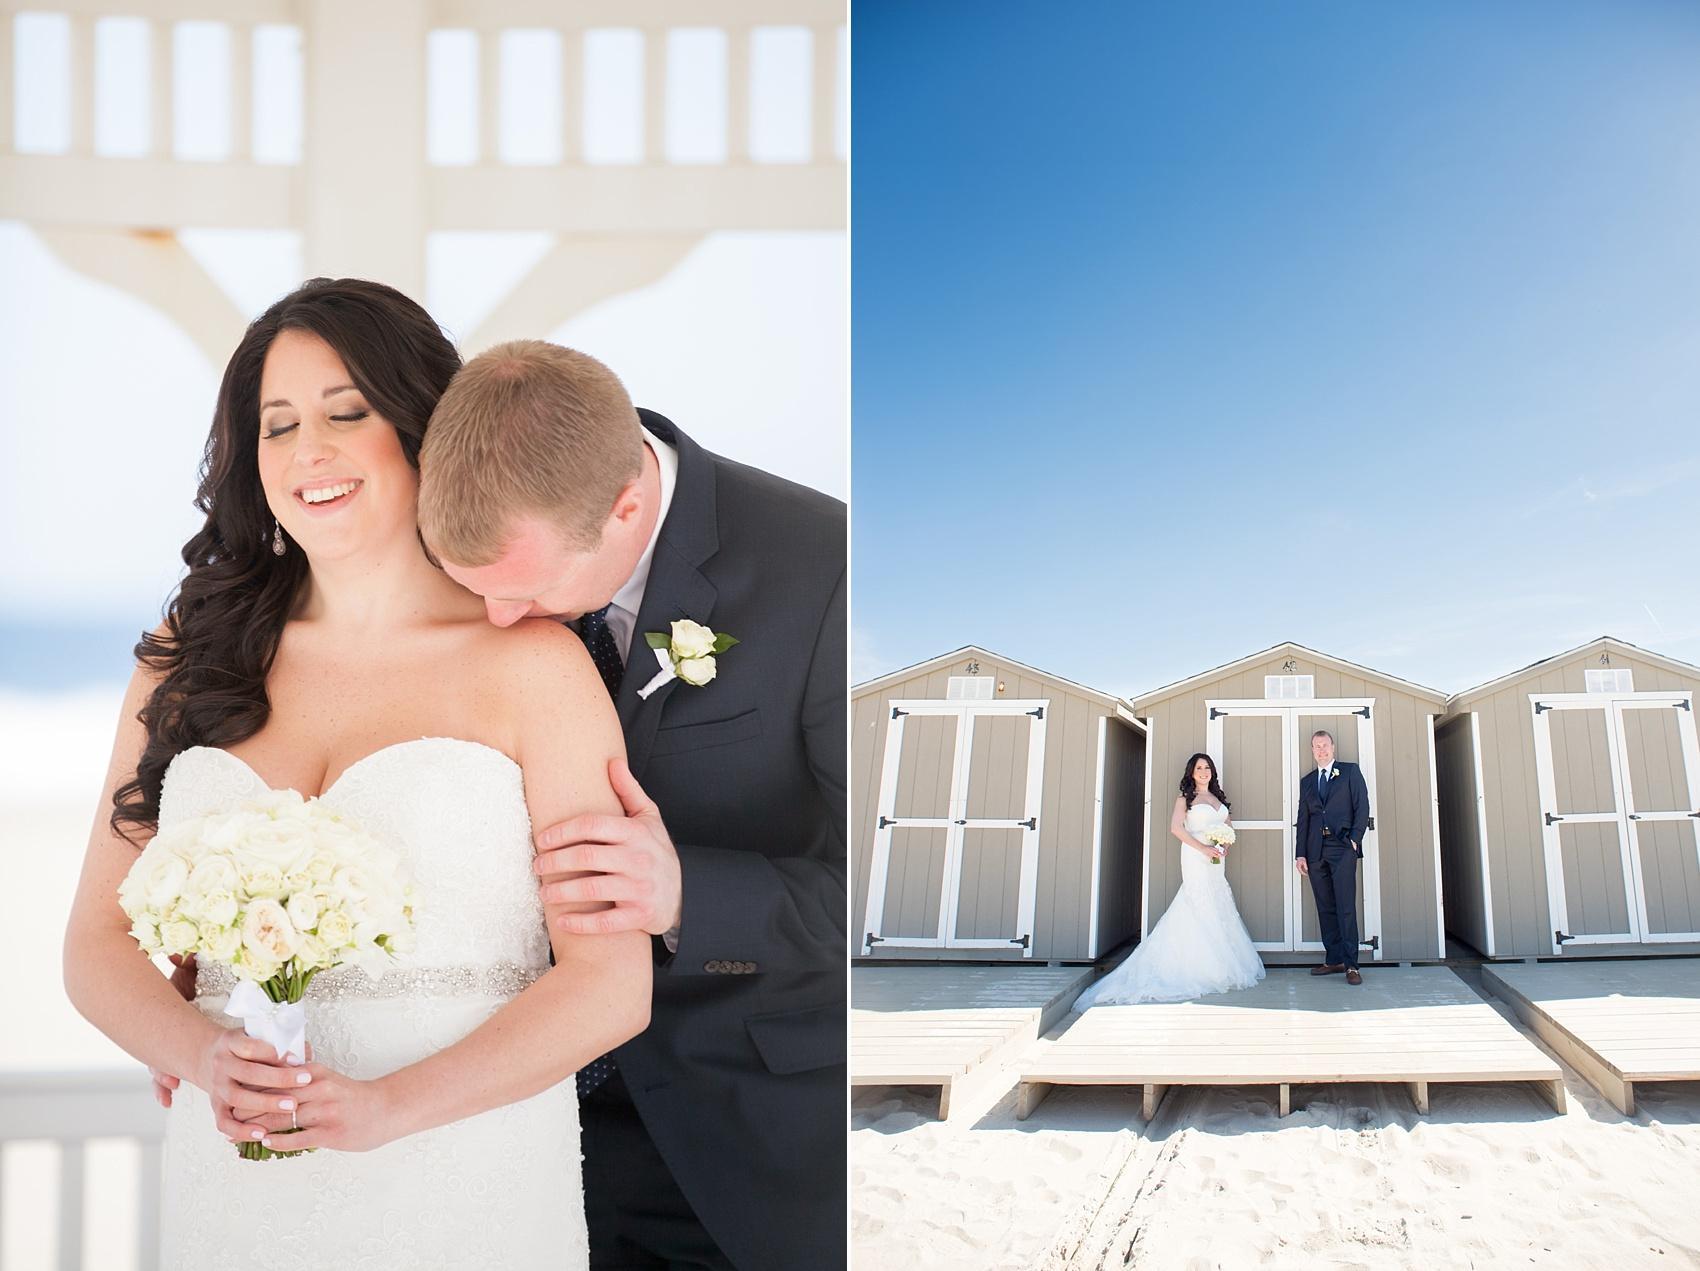 Photo by Mikkel Paige photography. Bride and groom photos at the beach cabanas for a spring wedding at Windows on the Water, New Jersey.